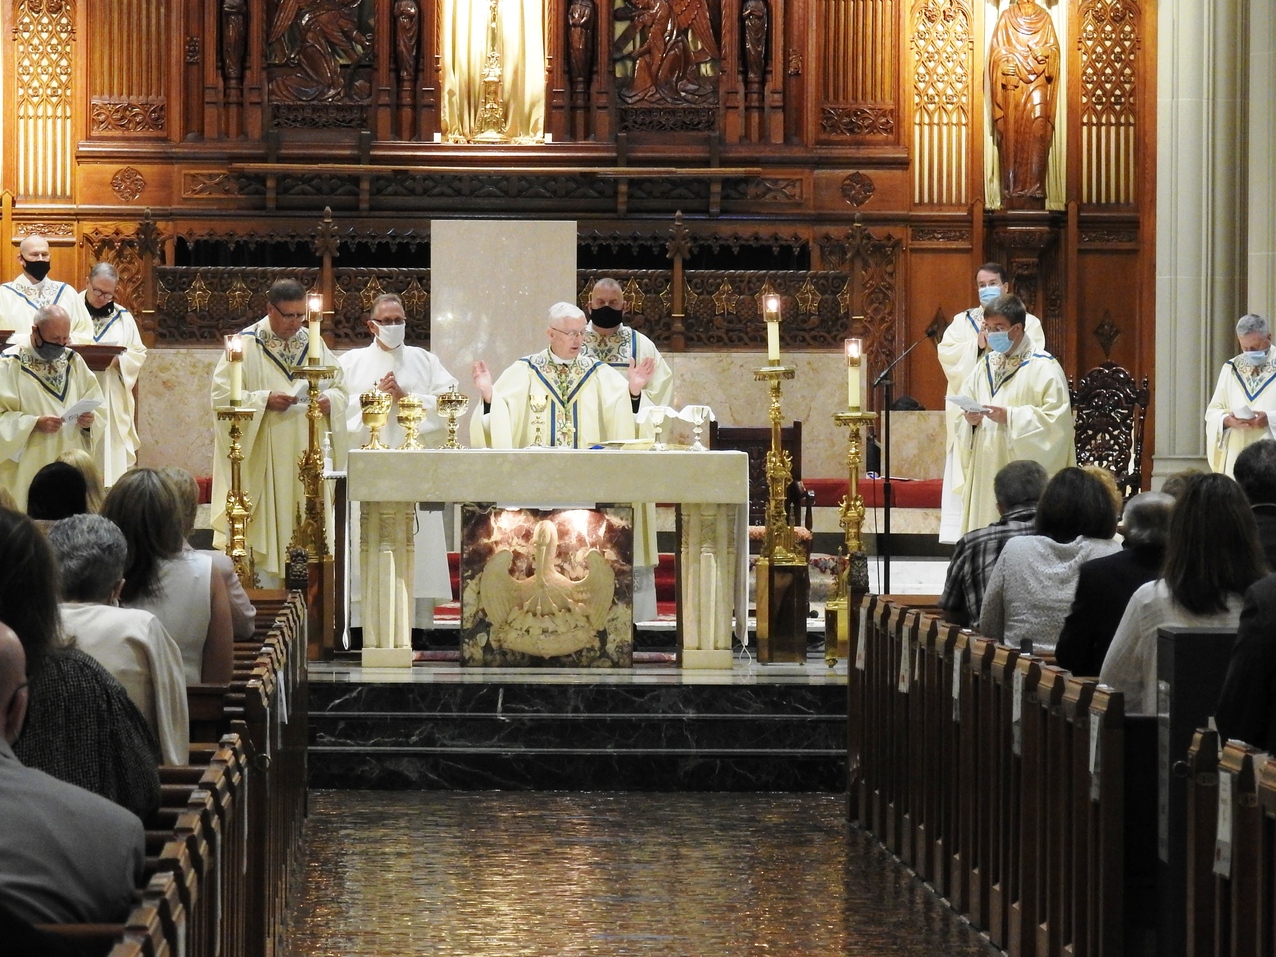 Three new permanent deacons begin their ministry of service 